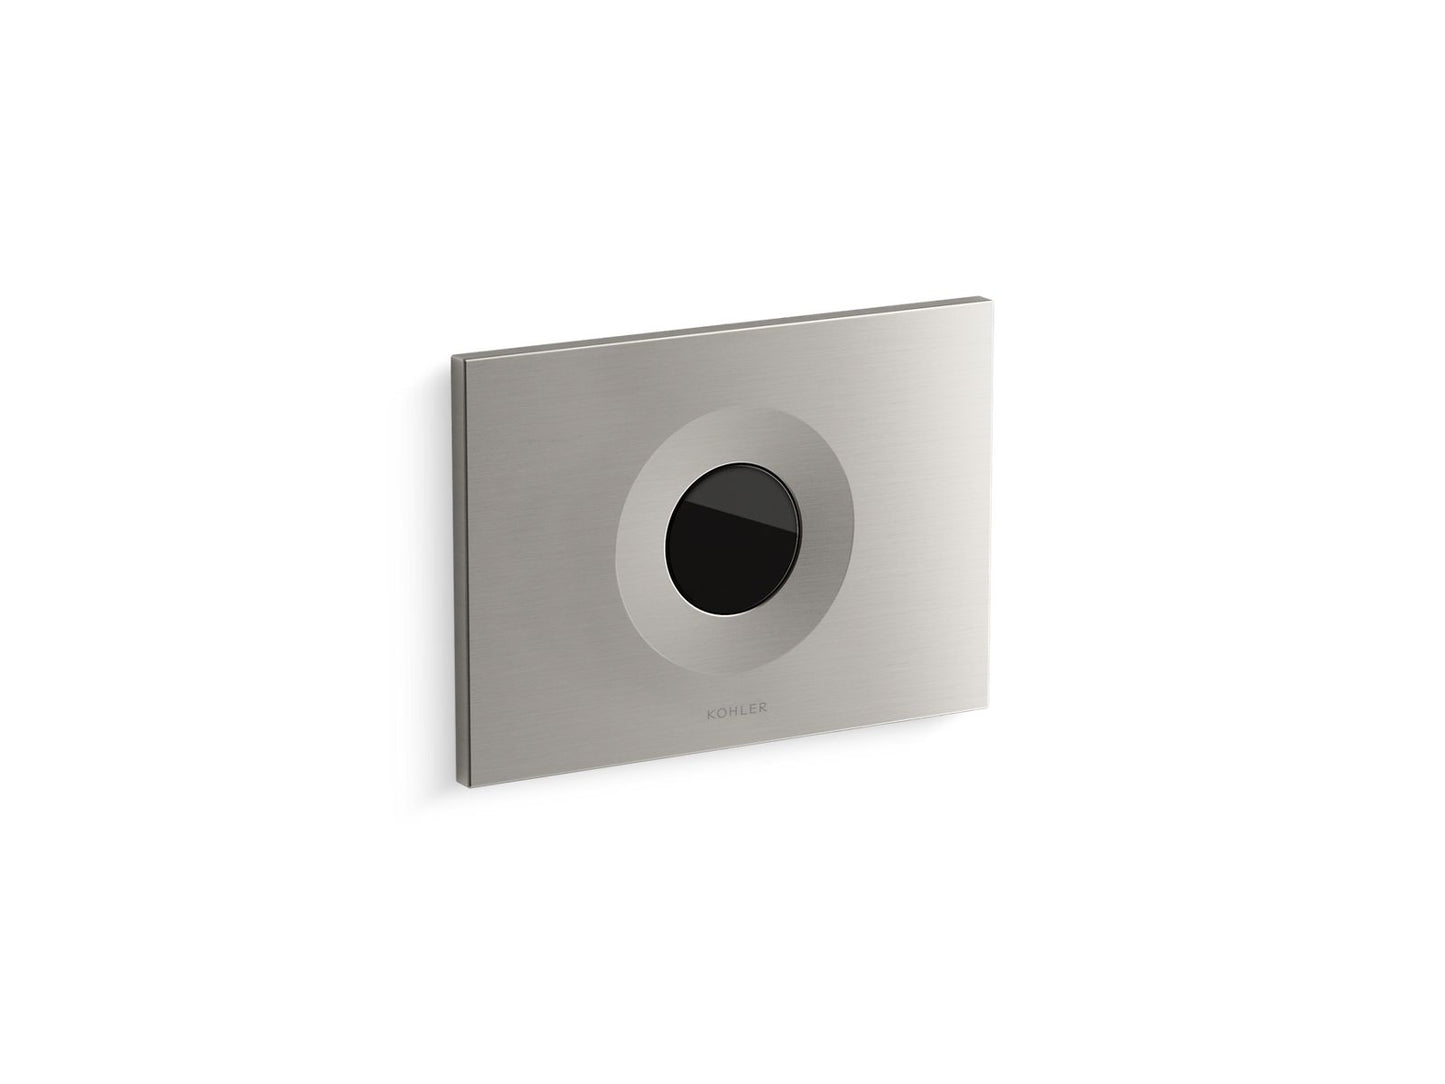 KOHLER K-78066-F-BS Beam Dual-Flush Touchless Actuator Plate For 2" X 4" In-Wall Tank And Carrier System In Brushed Stainless